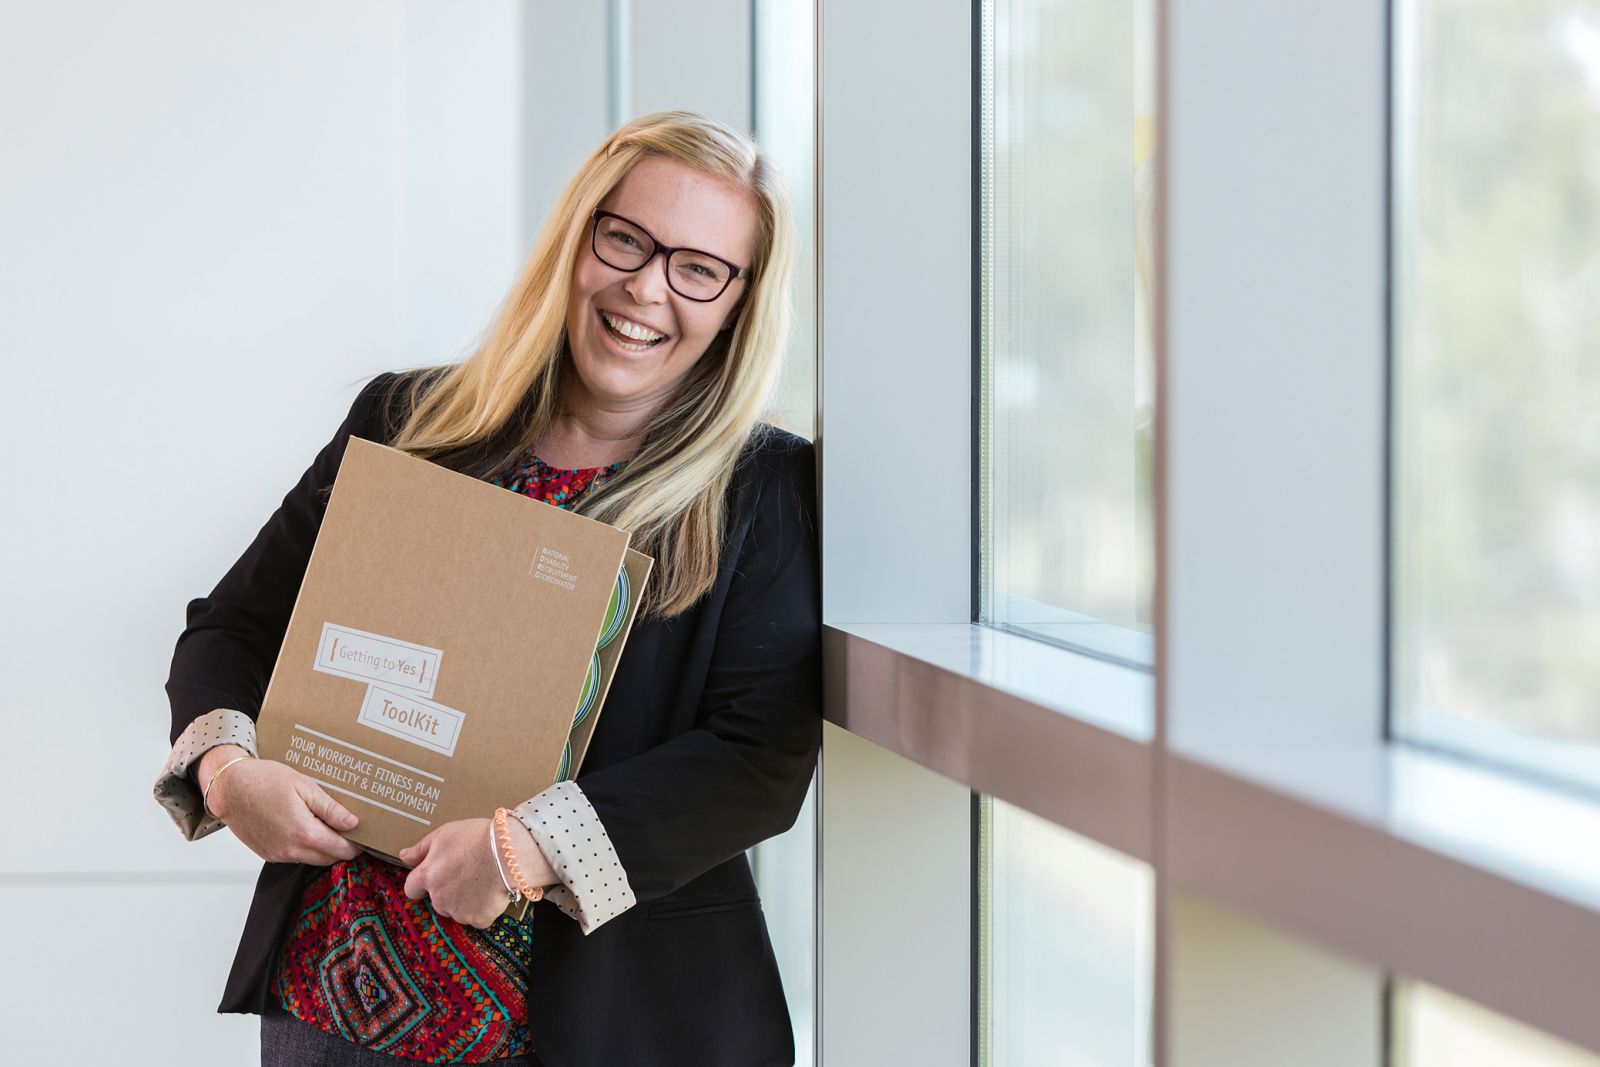 woman smiling and holding a work folder